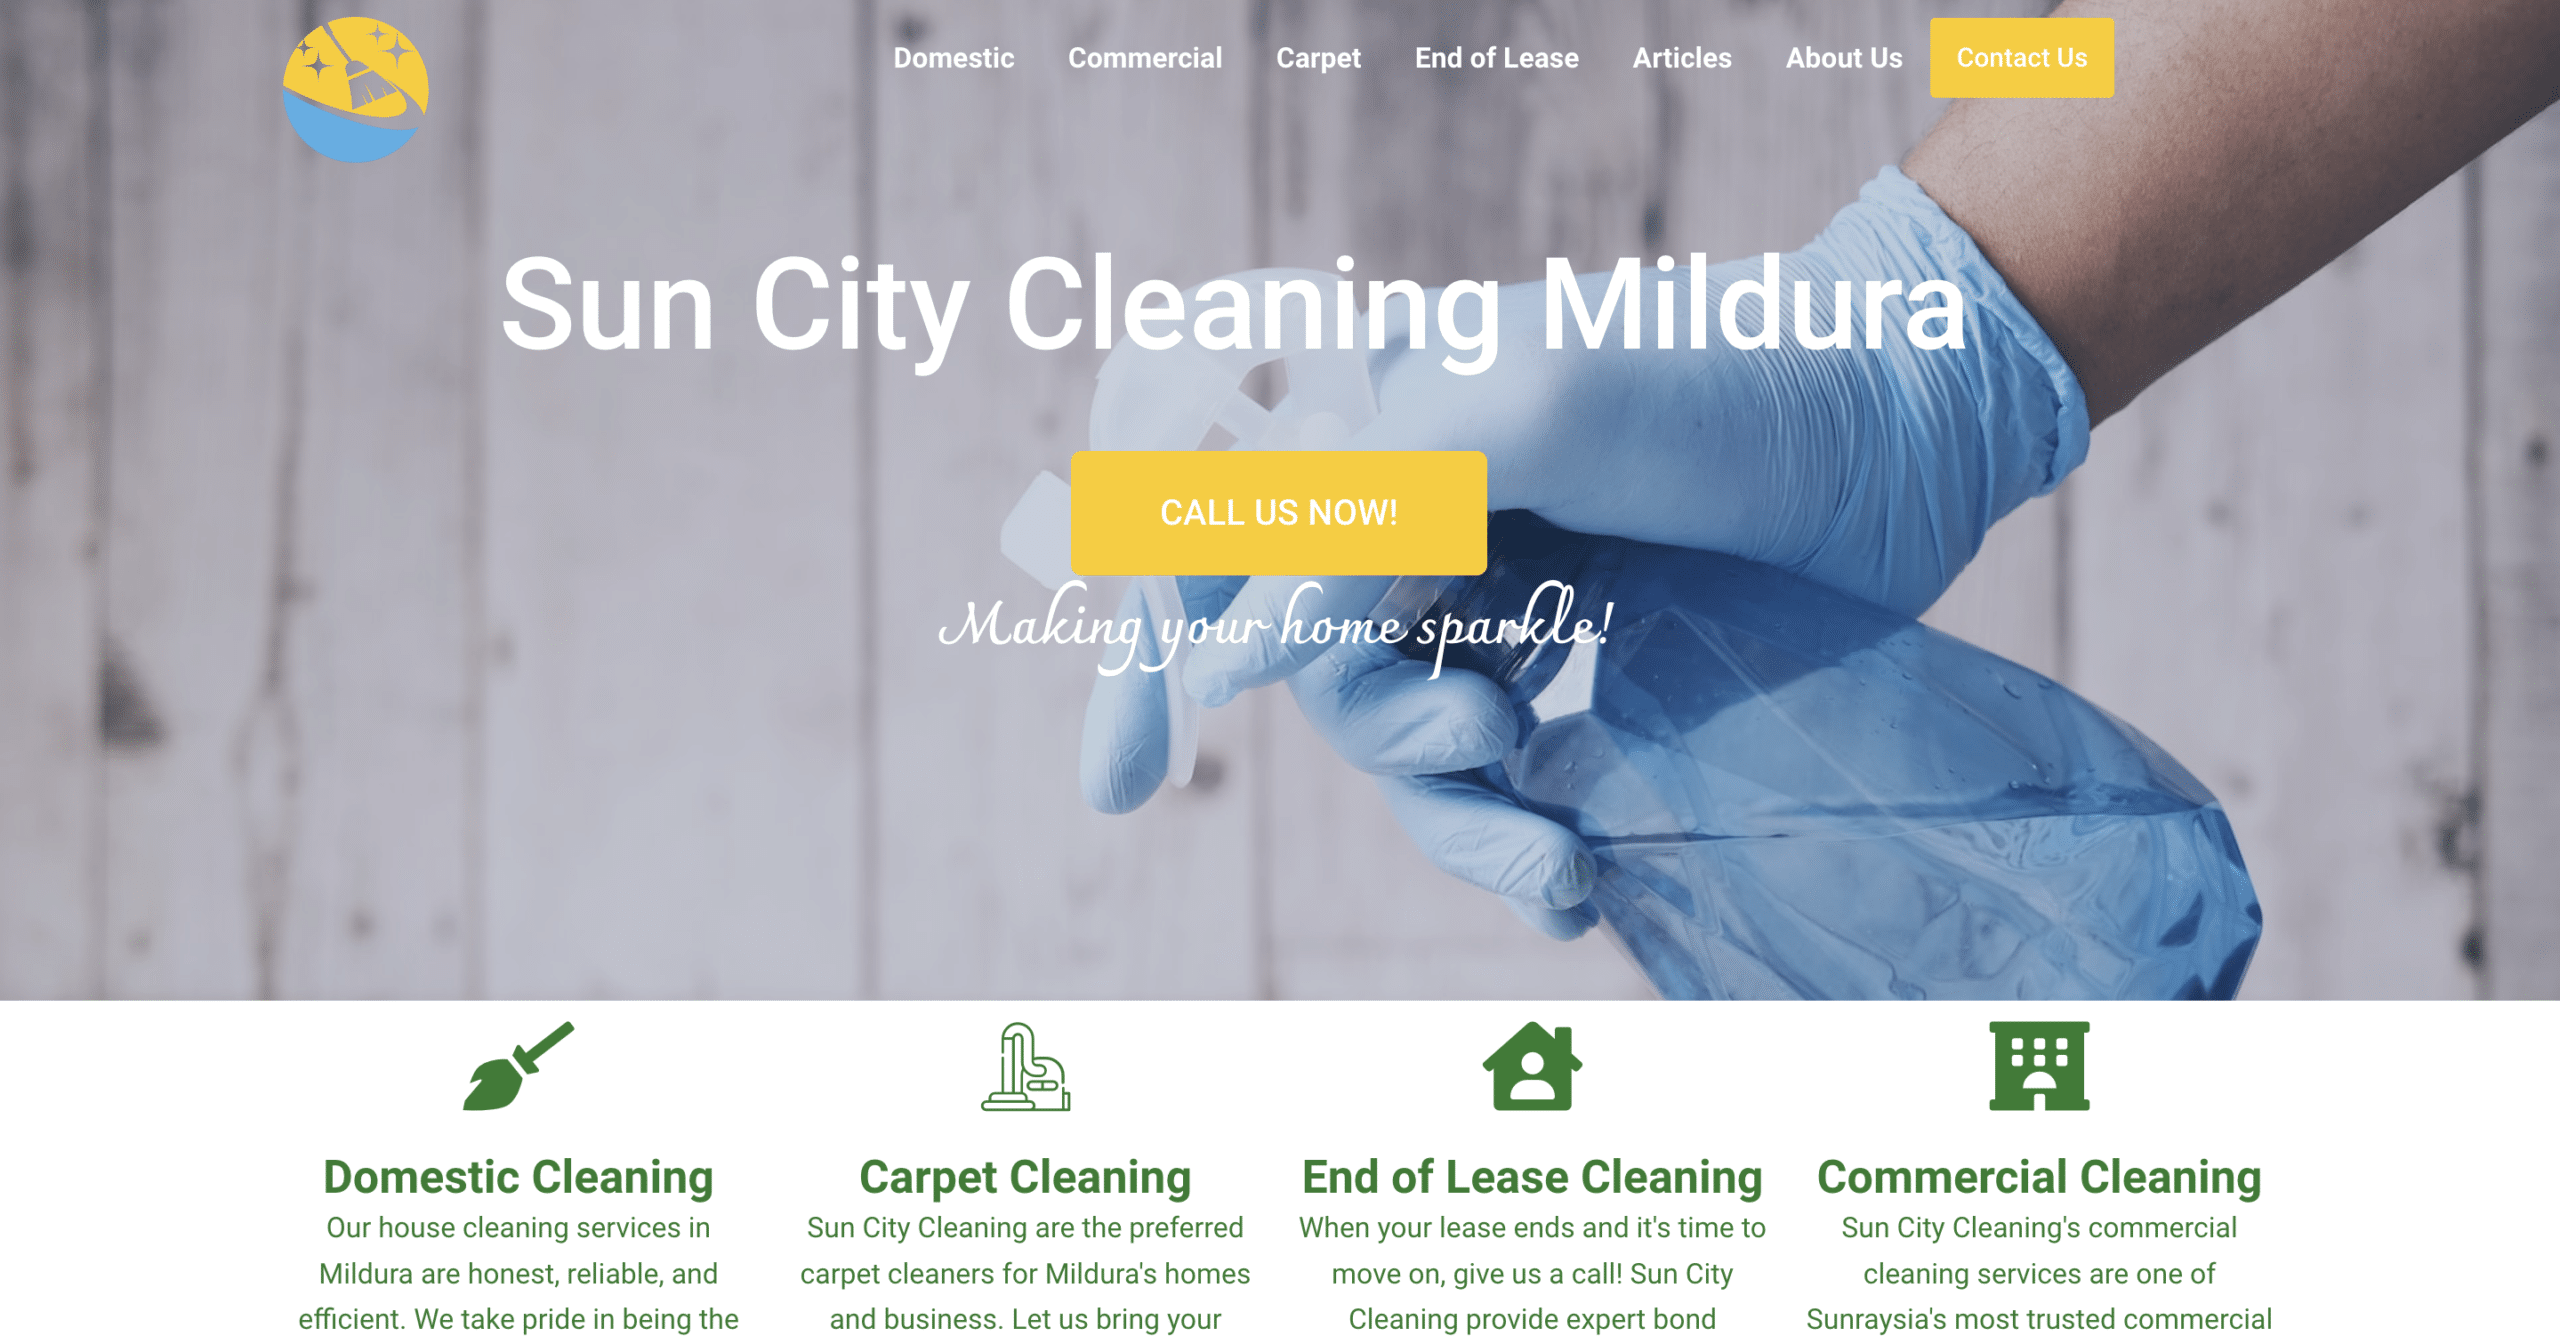 Sun City Cleaning